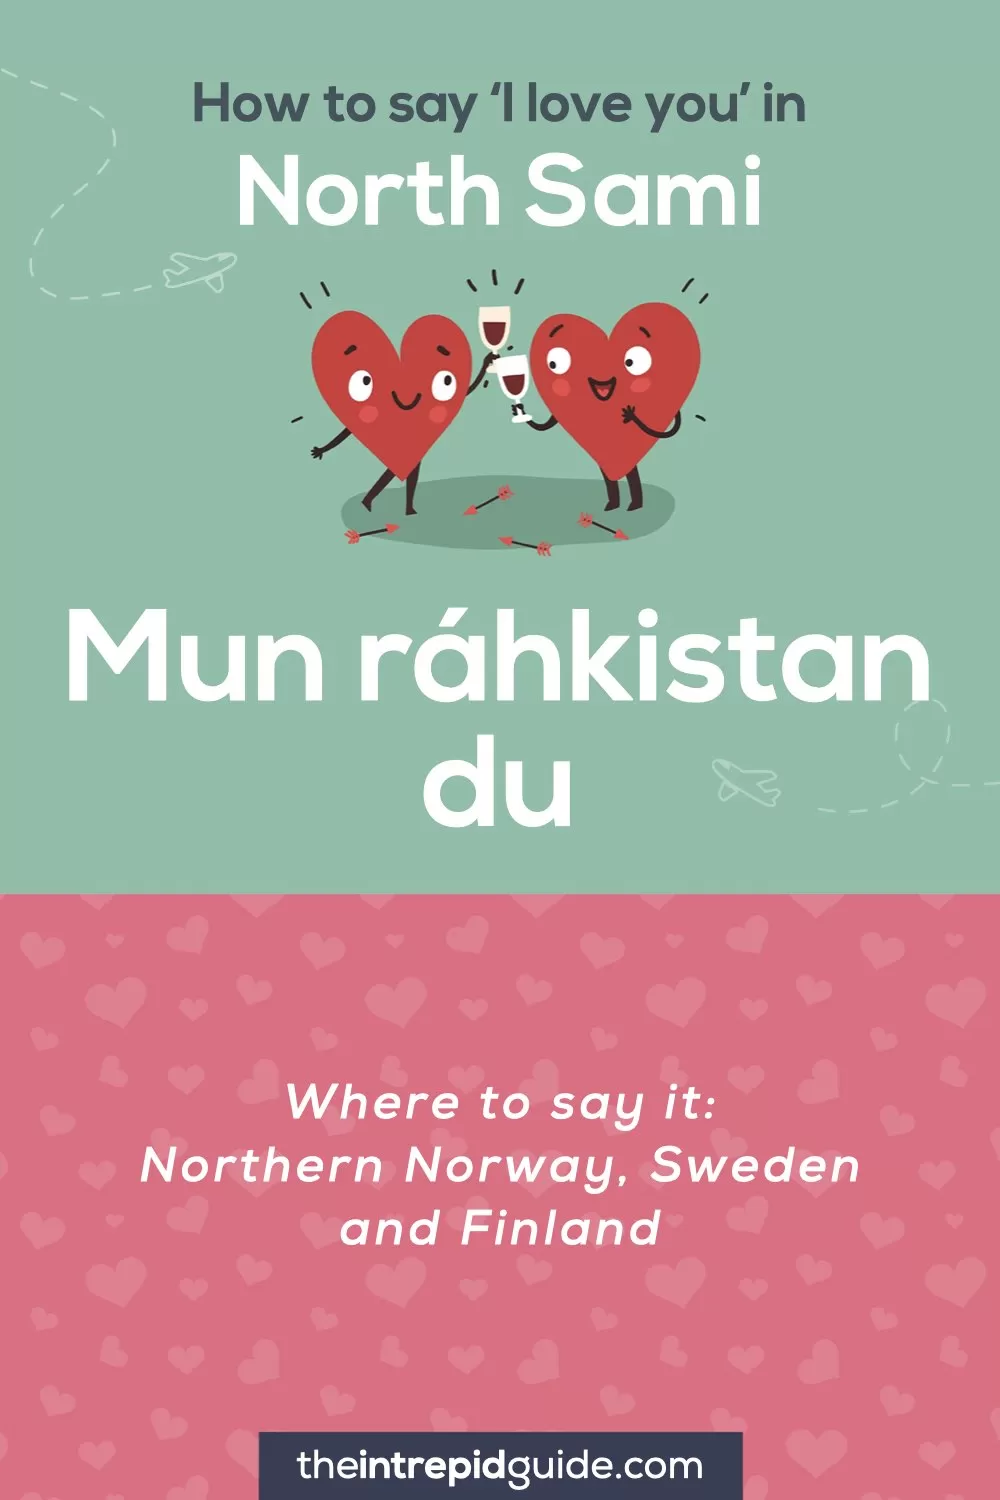 How to say I love you in different languages - Northern Sami - North Sami - Mun rahkistan du